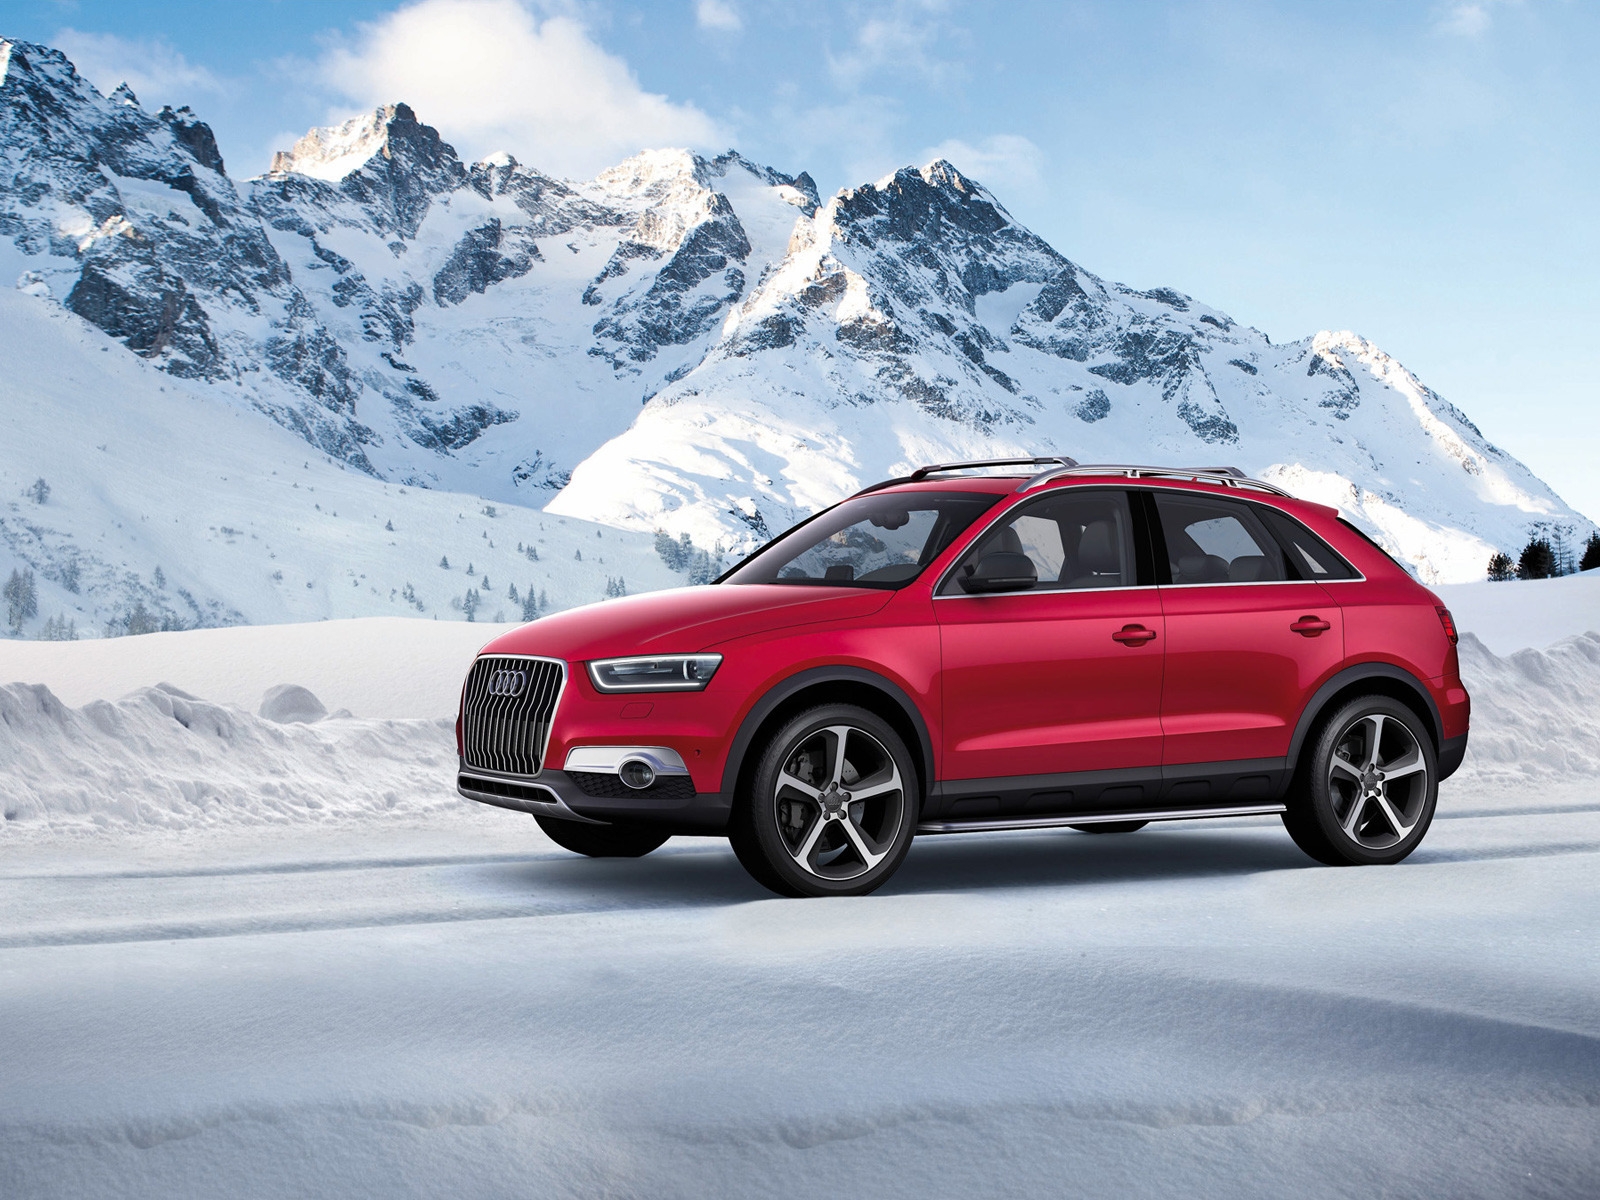 Audi Q3 Vail 2012 for 1600 x 1200 resolution